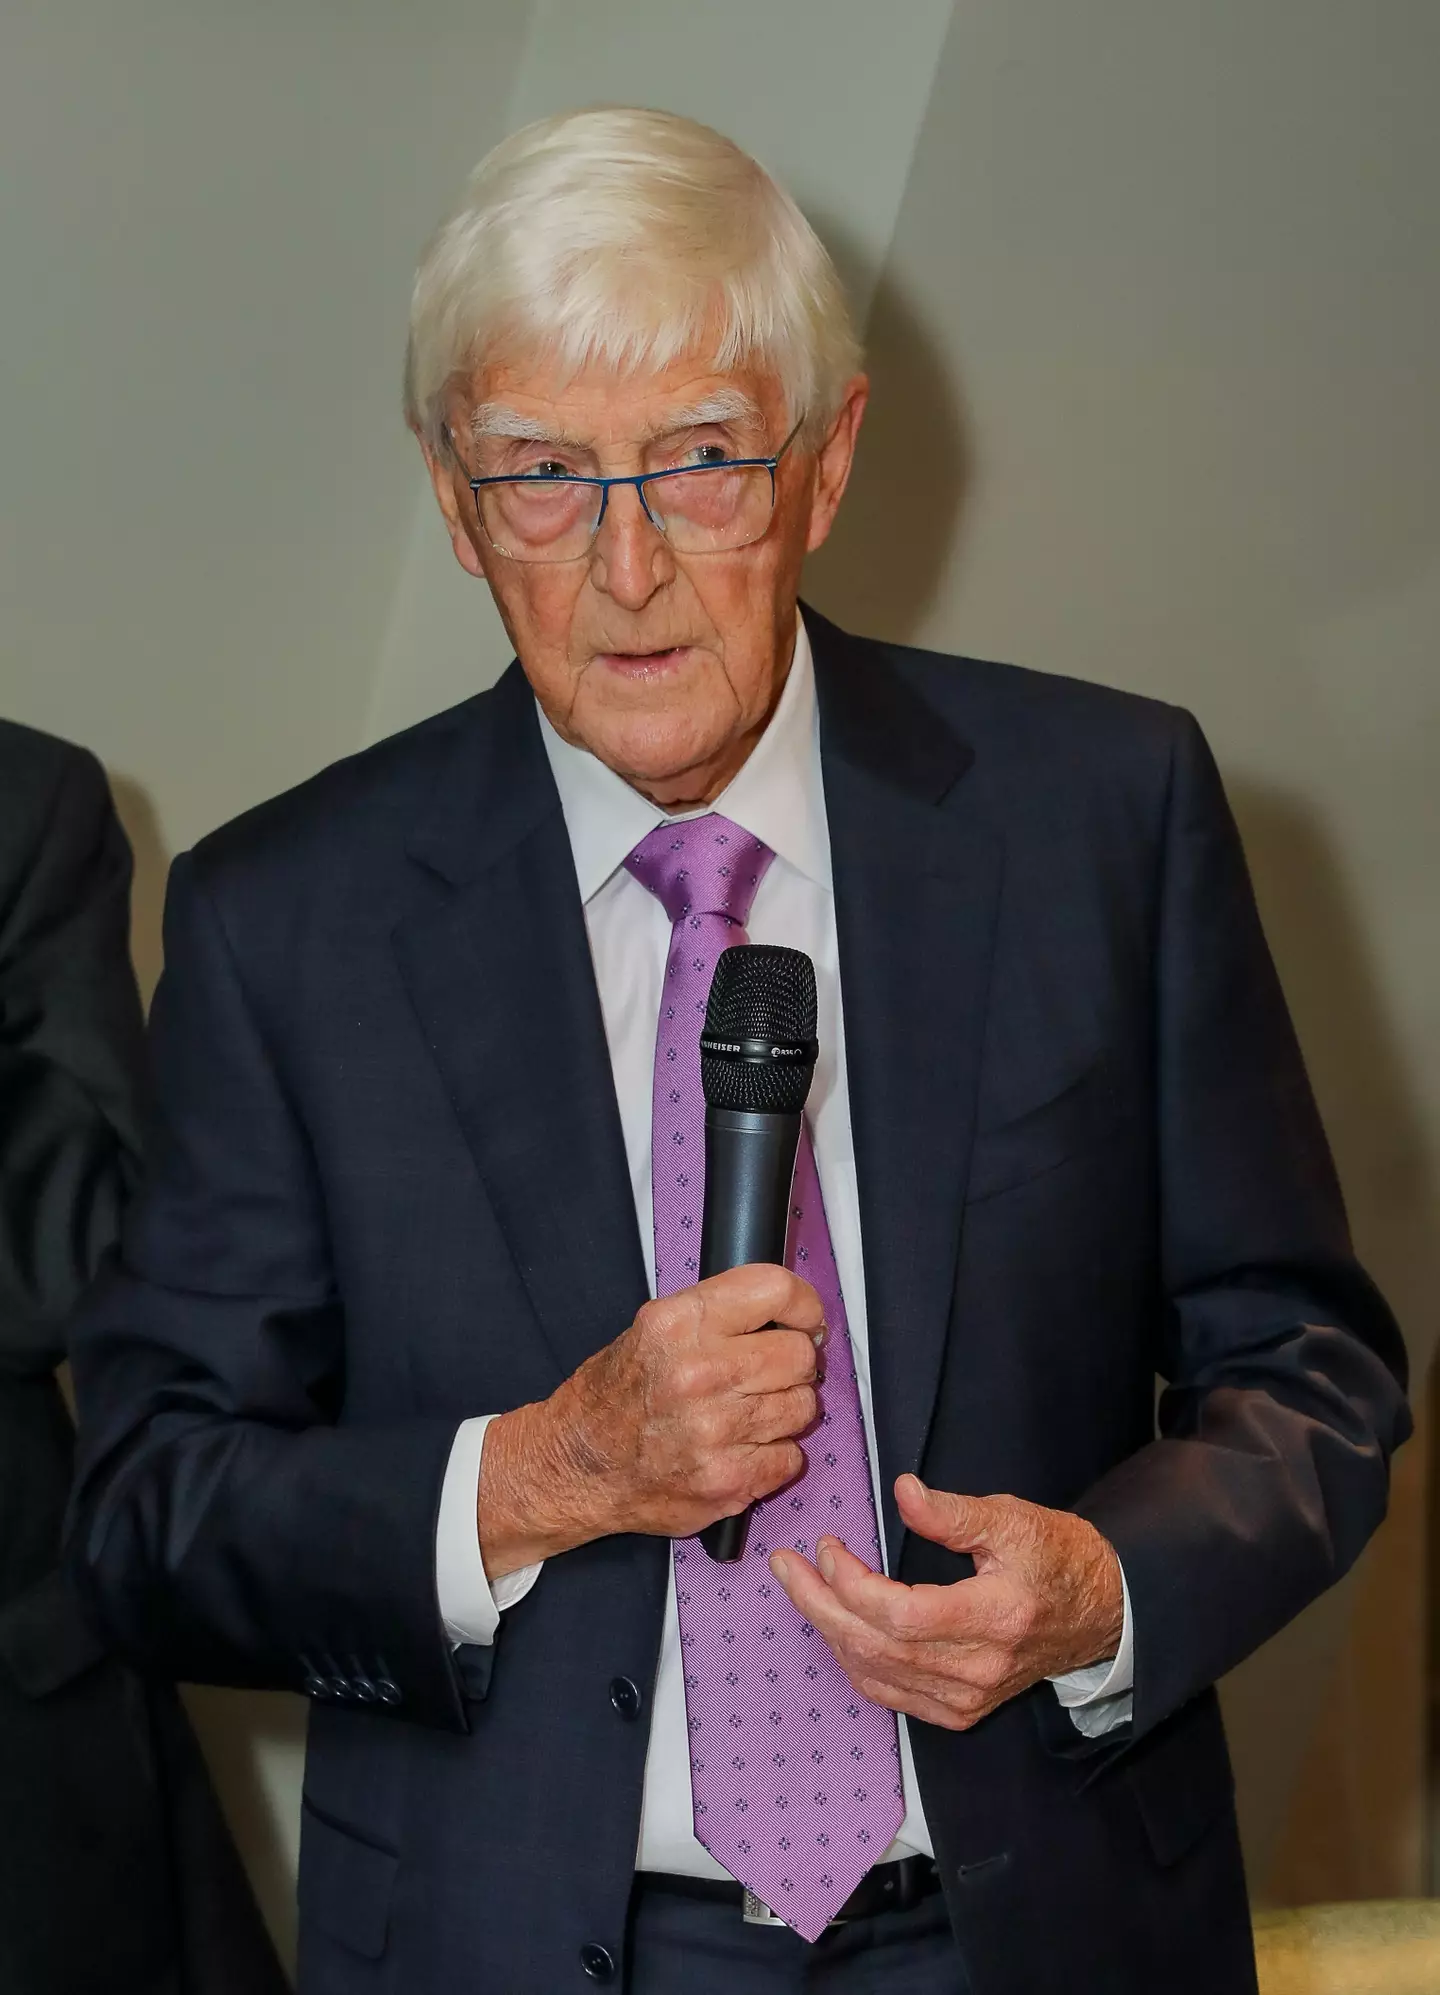 Sir Michael Parkinson died this week at the age of 88.